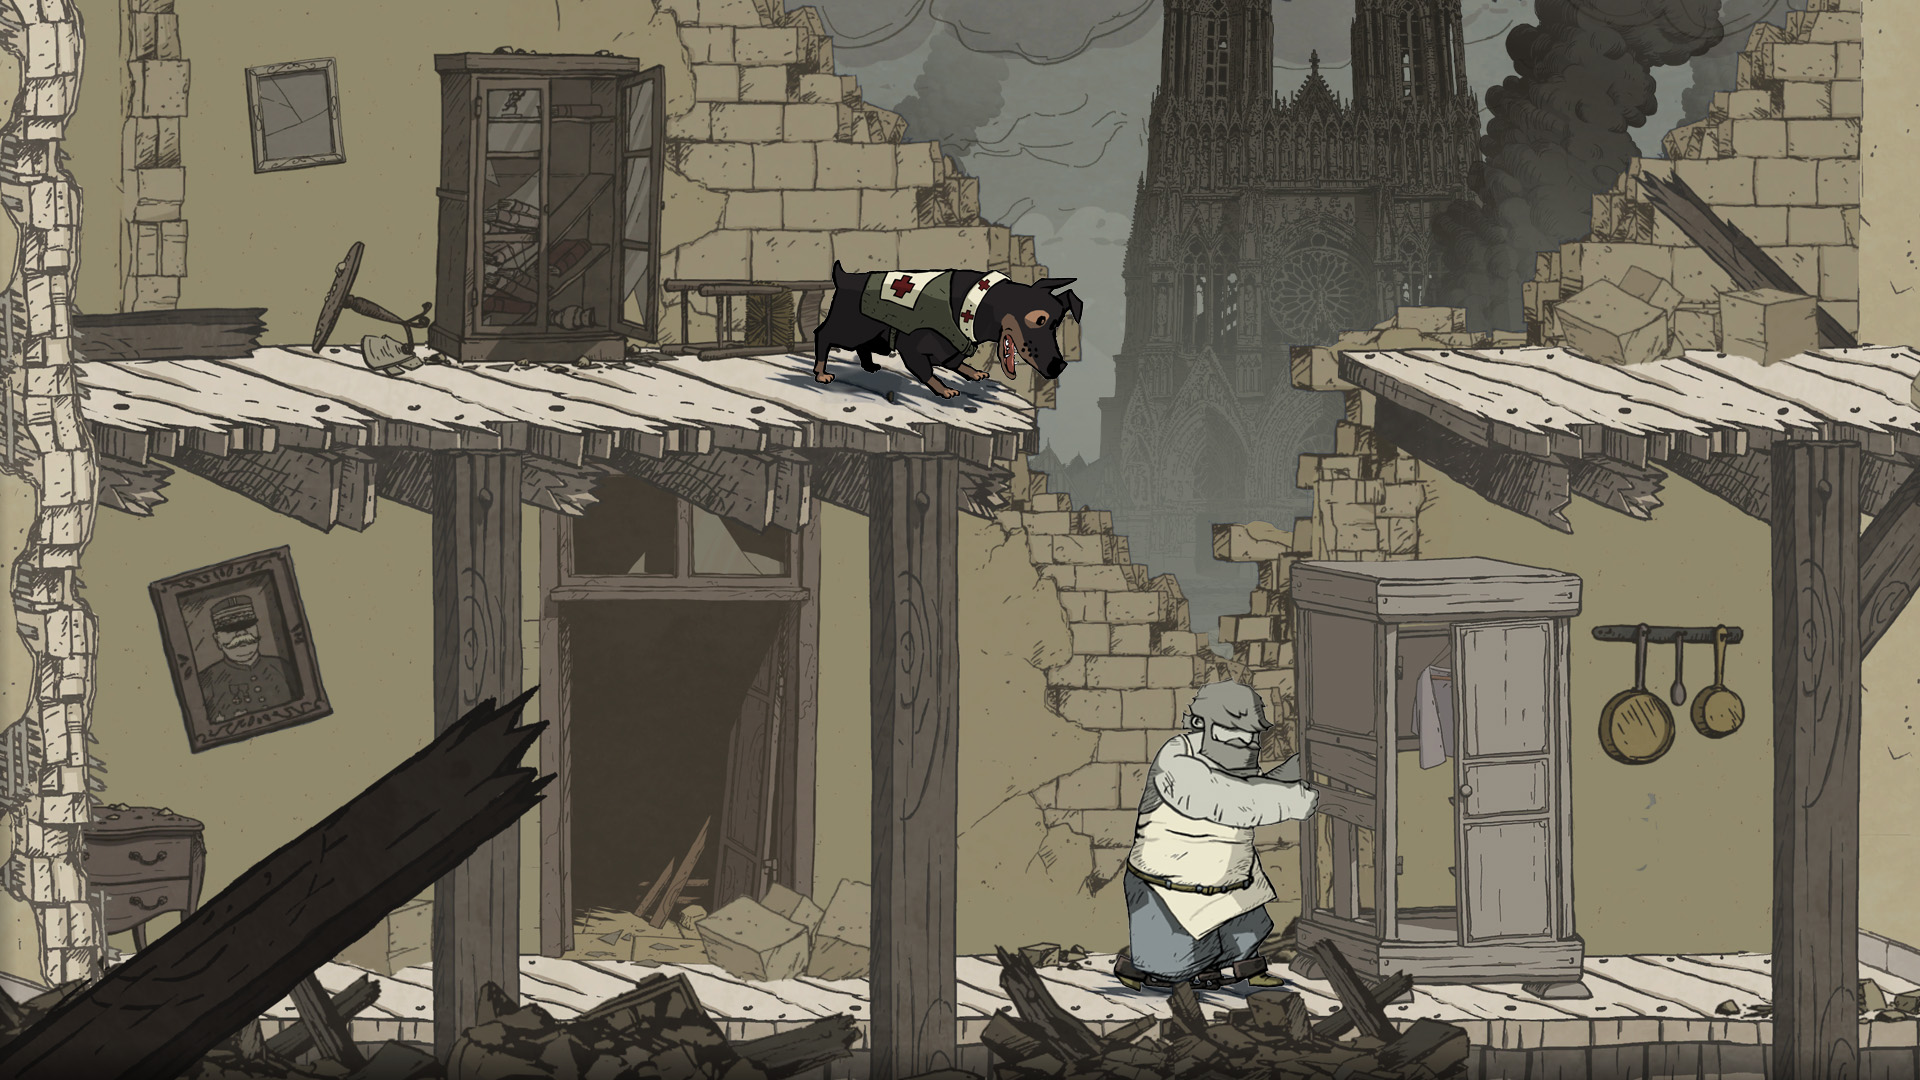 It’s Easy To Fall In Love With This Wistful WWI Adventure Game